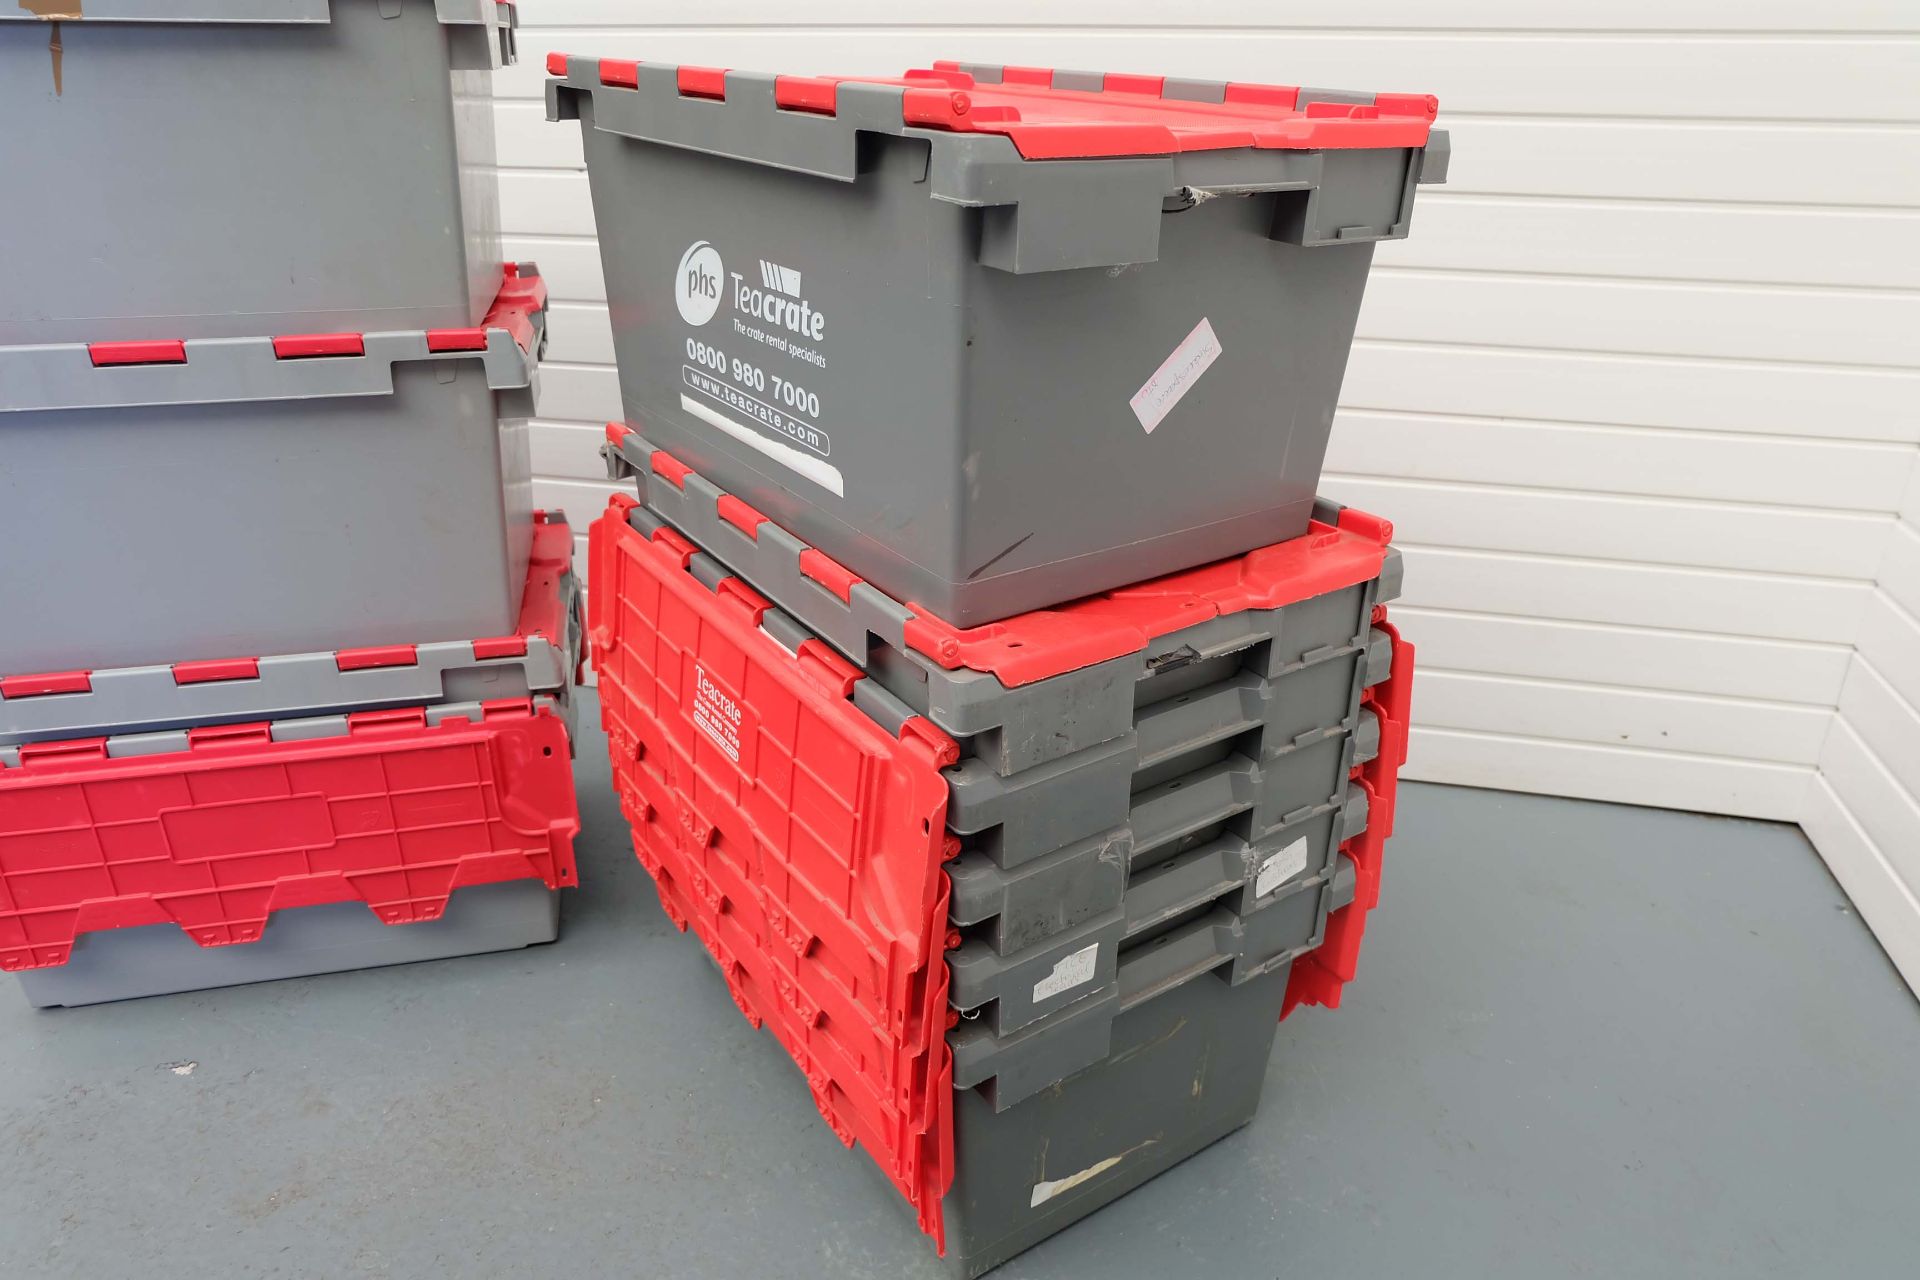 10 x PHS Teacrate. Type LC3B Standard Lidded Crate. Volume 80 Litres. - Image 3 of 6